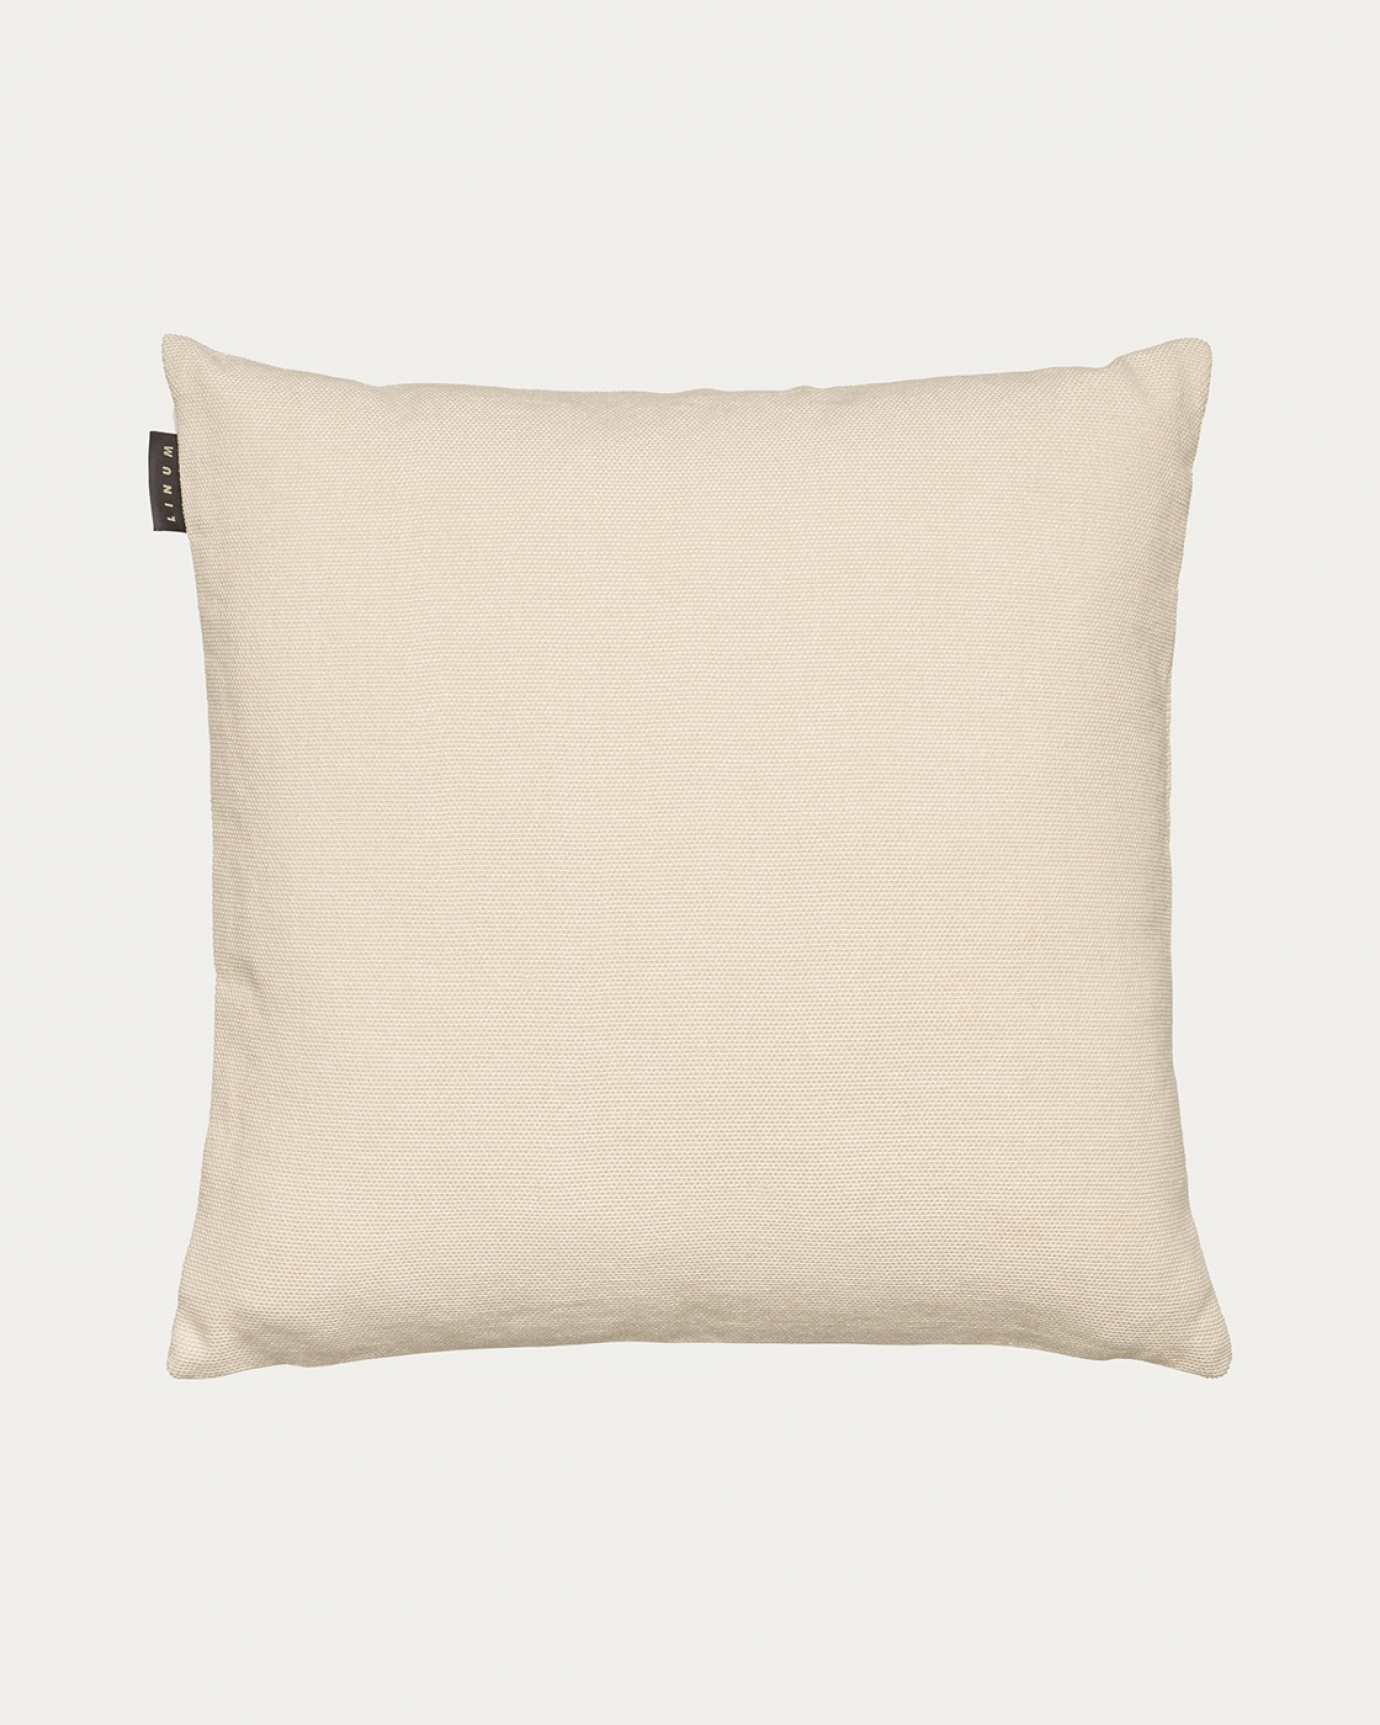 Product image creamy beige PEPPER cushion cover made of soft cotton from LINUM DESIGN. Easy to wash and durable for generations. Size 50x50 cm.